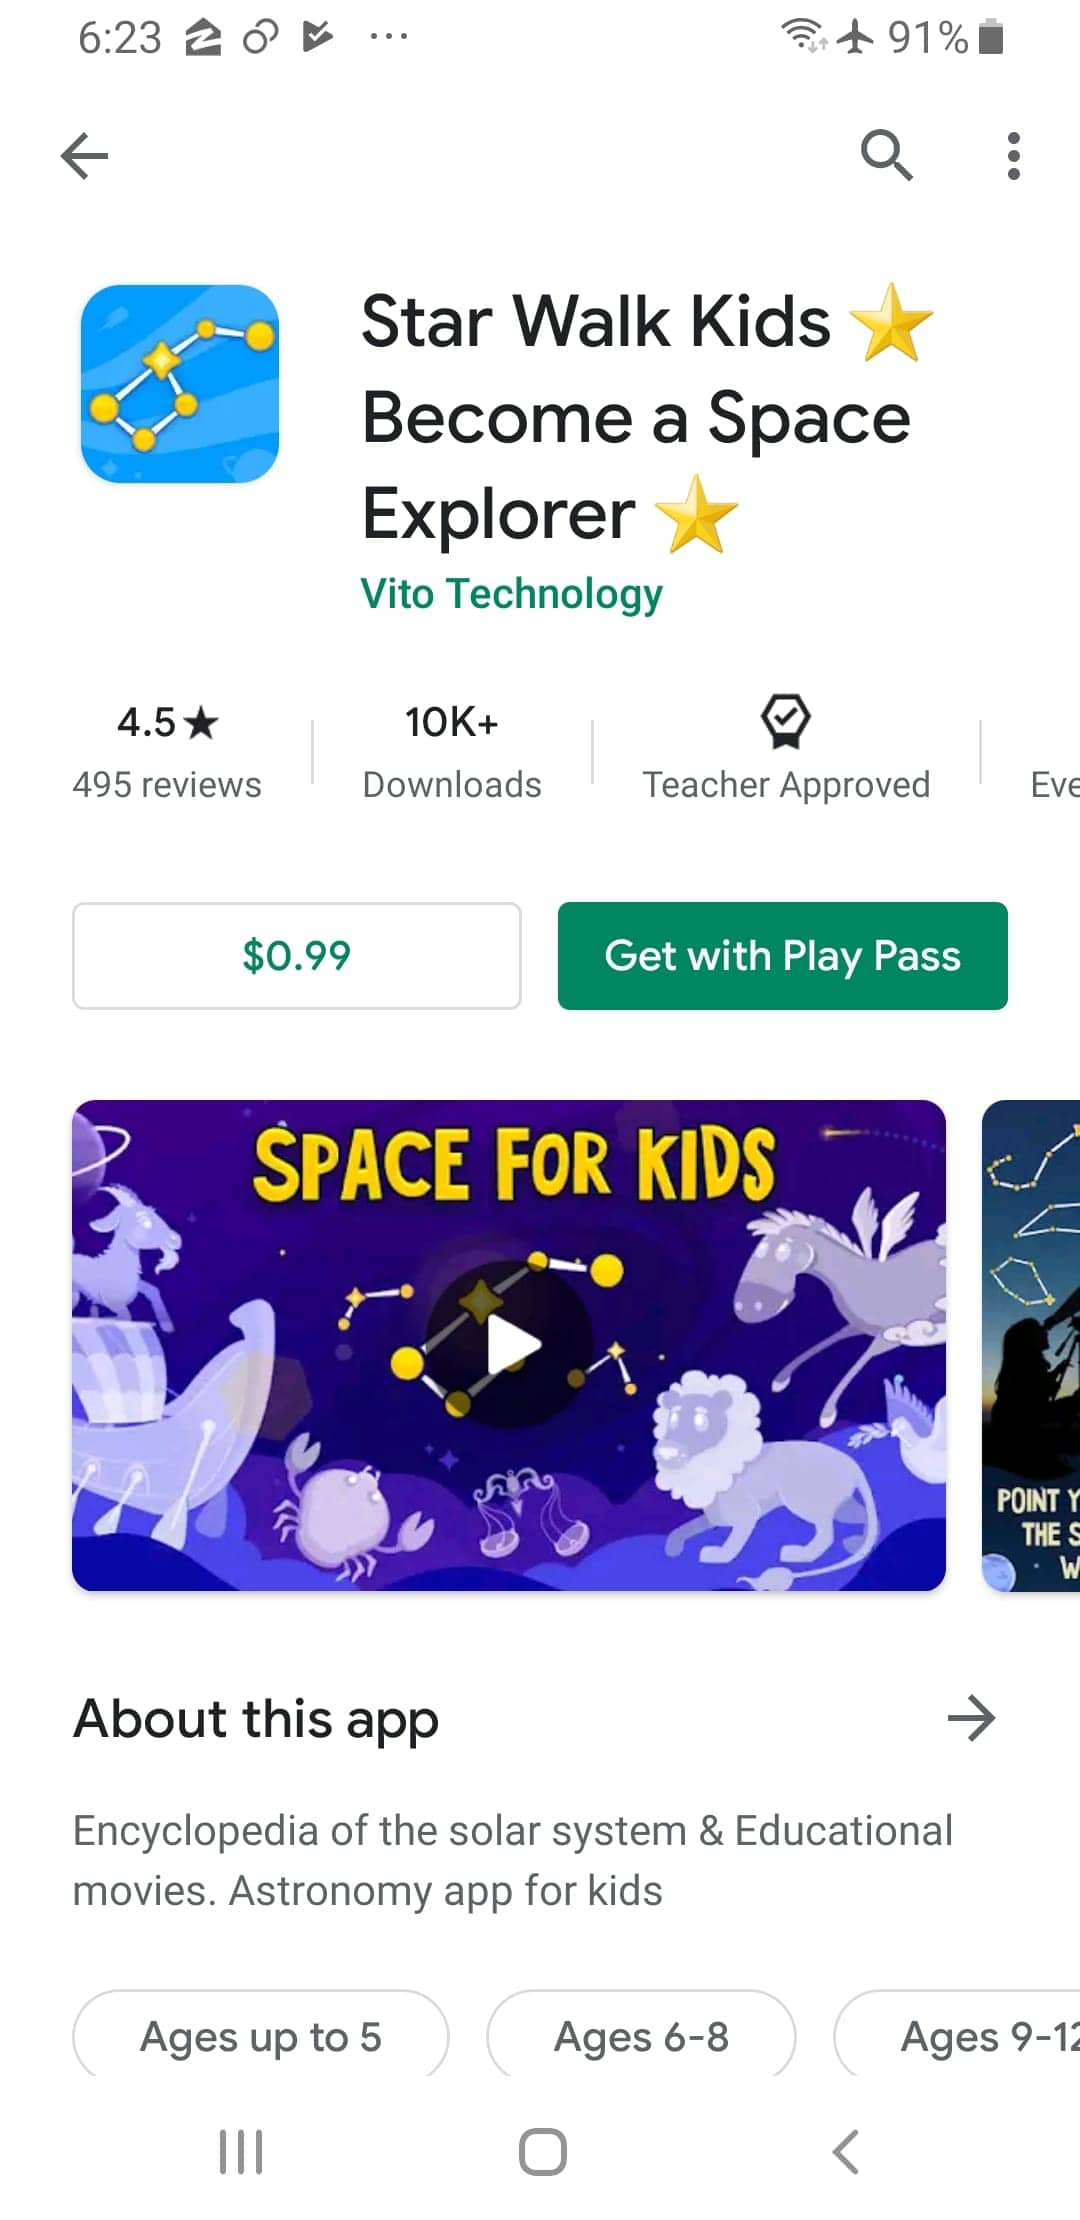 Screenshot From Our Star Walk Kids Review